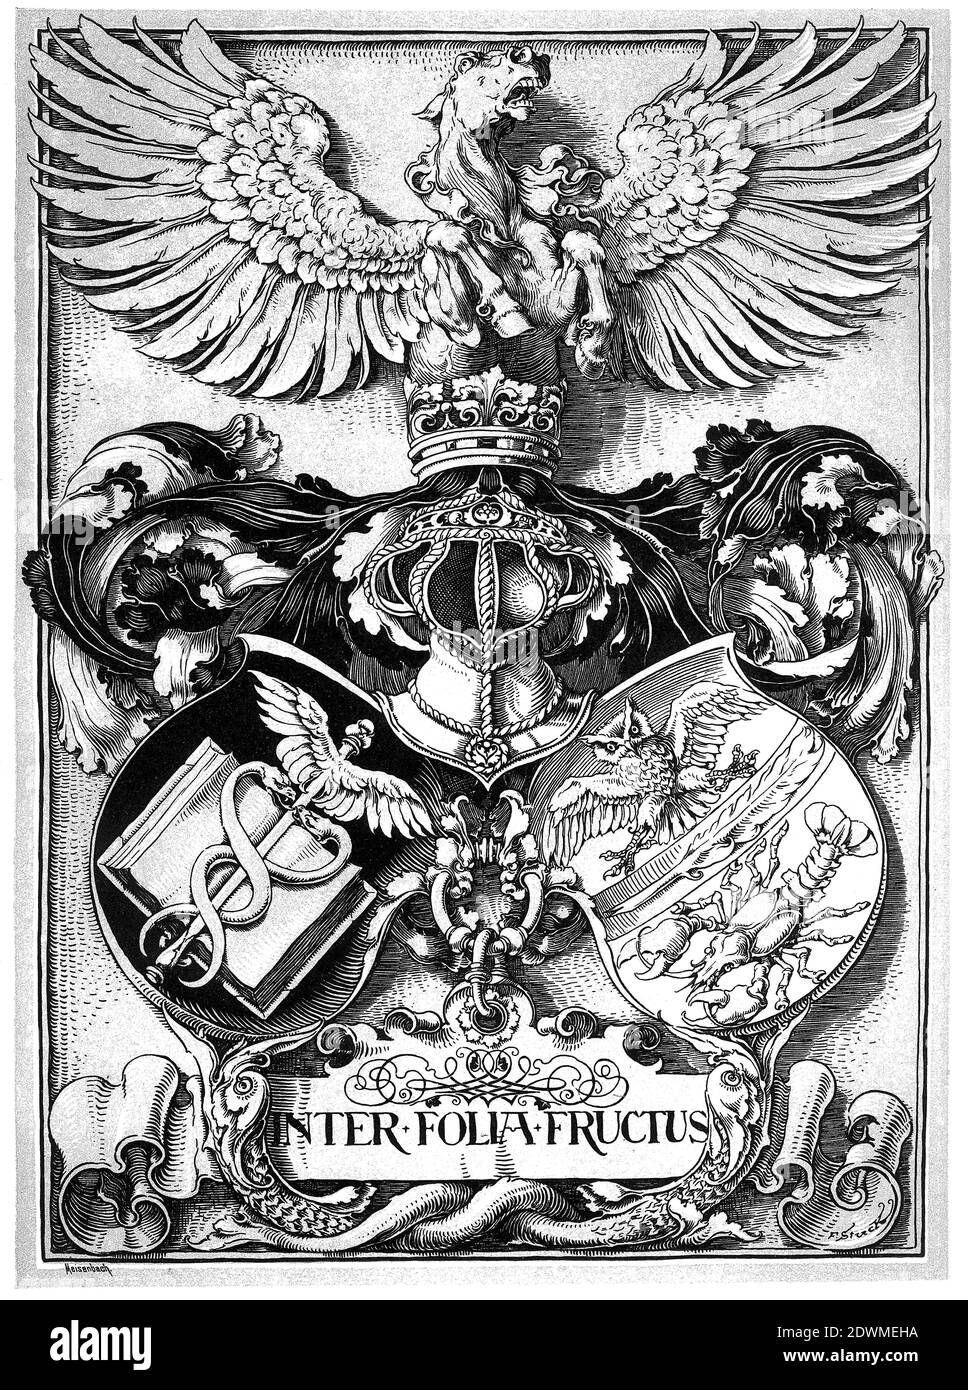 Coat of arms of the booksellers, Wappen der Buchhändler, Inter Folia Fructus Stock Photo